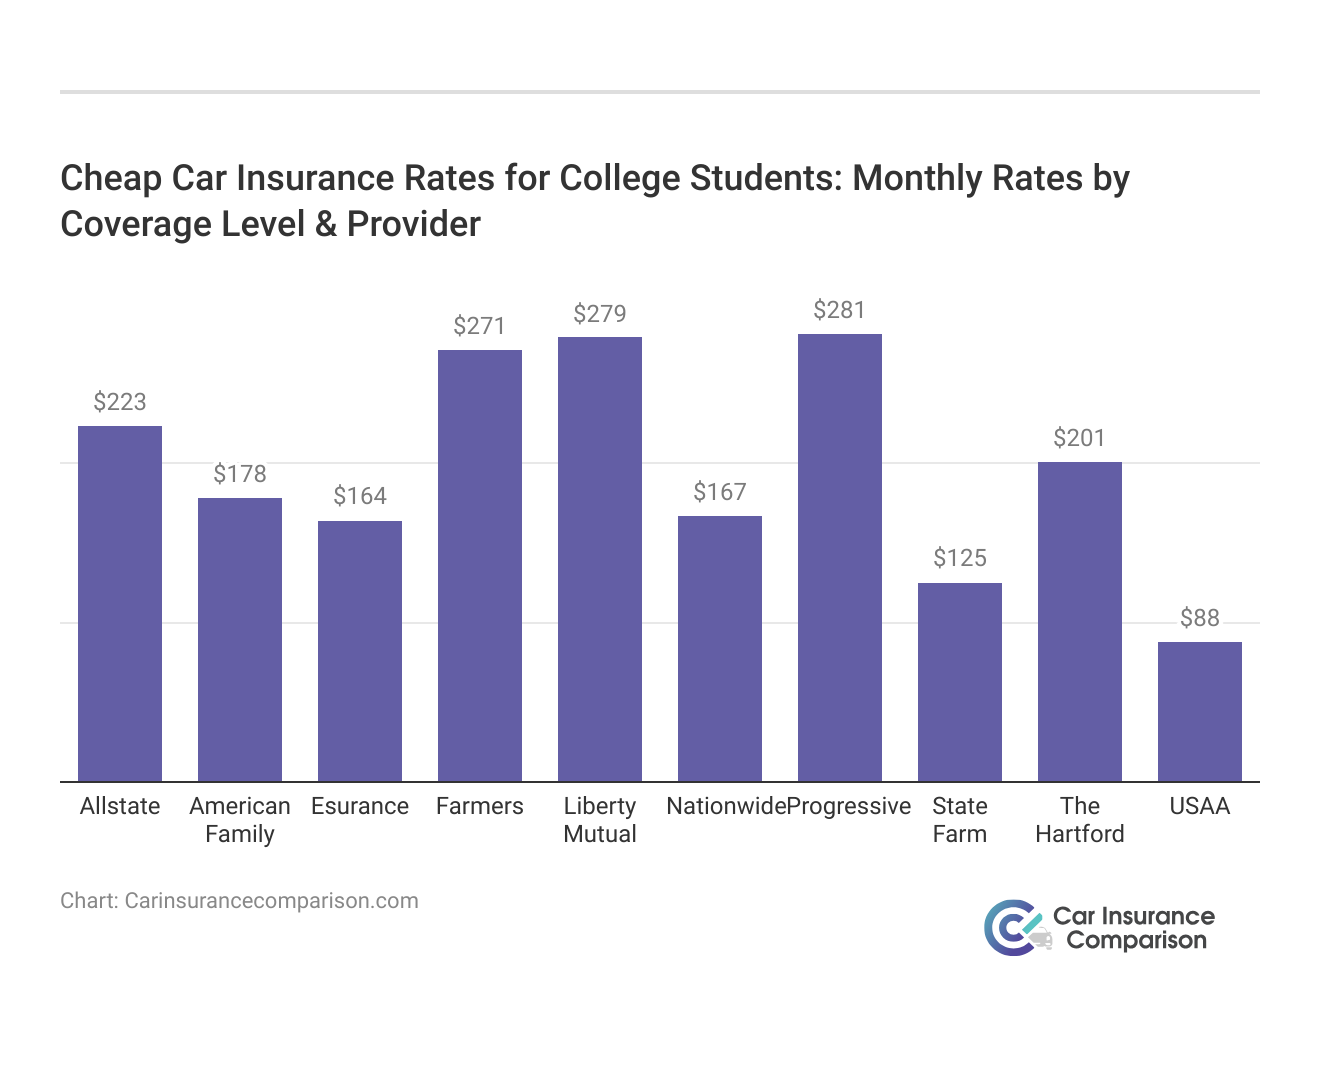 <h3>Cheap Car Insurance Rates for College Students: Monthly Rates by Coverage Level & Provider</h3>